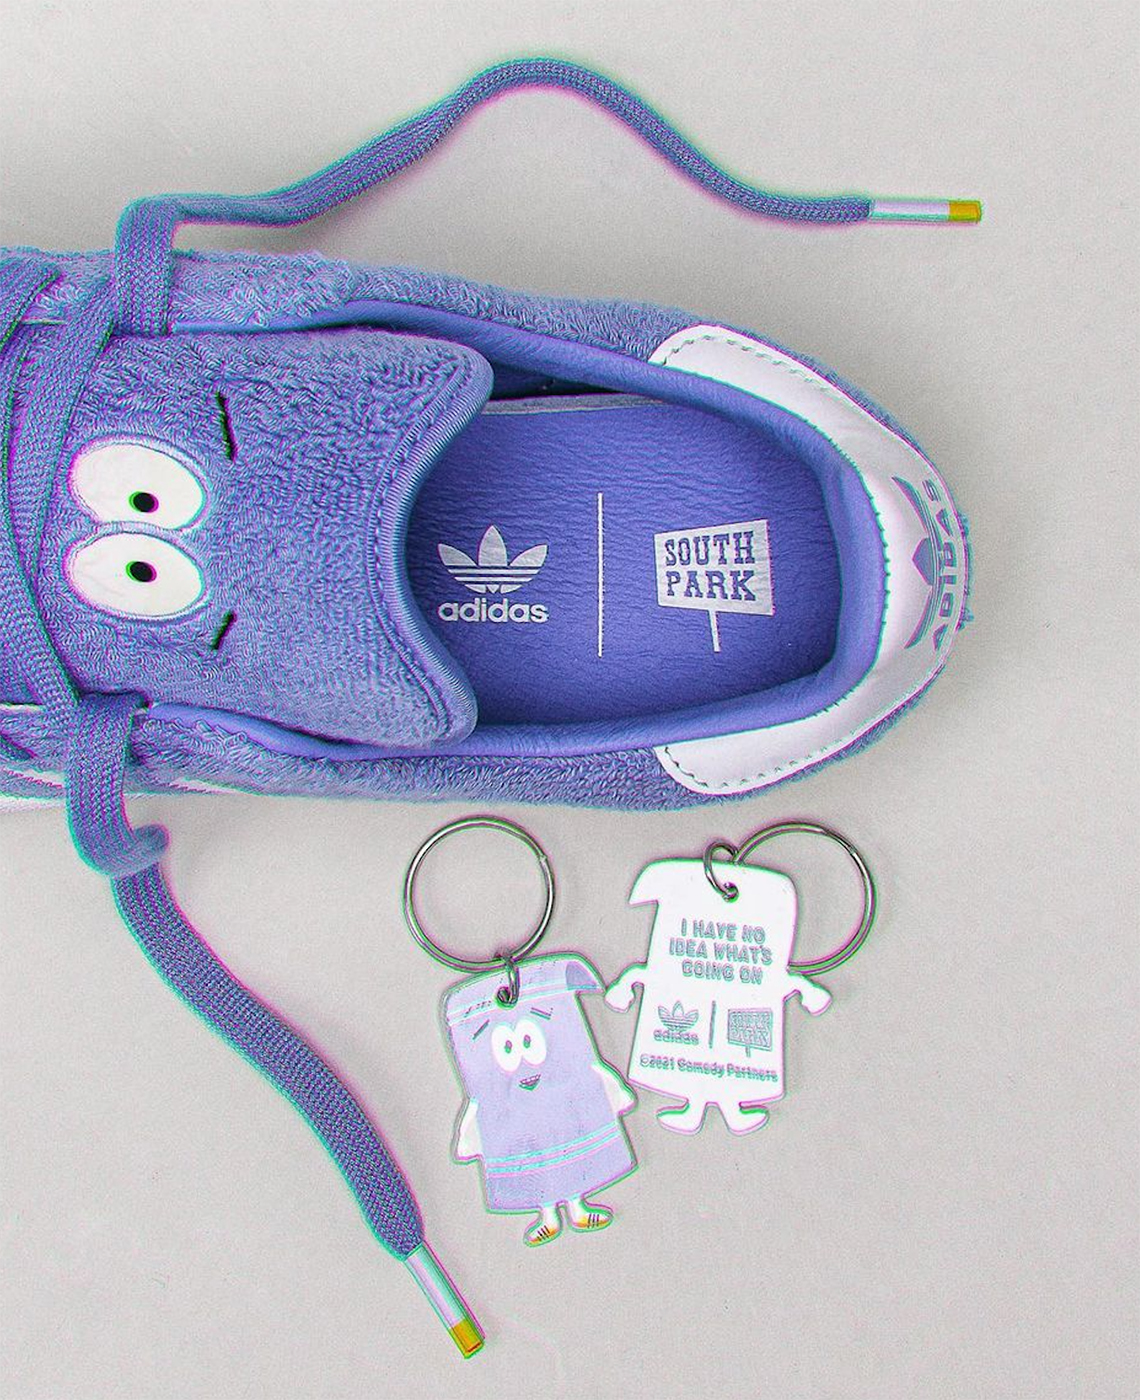 Towelie Adidas South Park Shoes Release Date 3